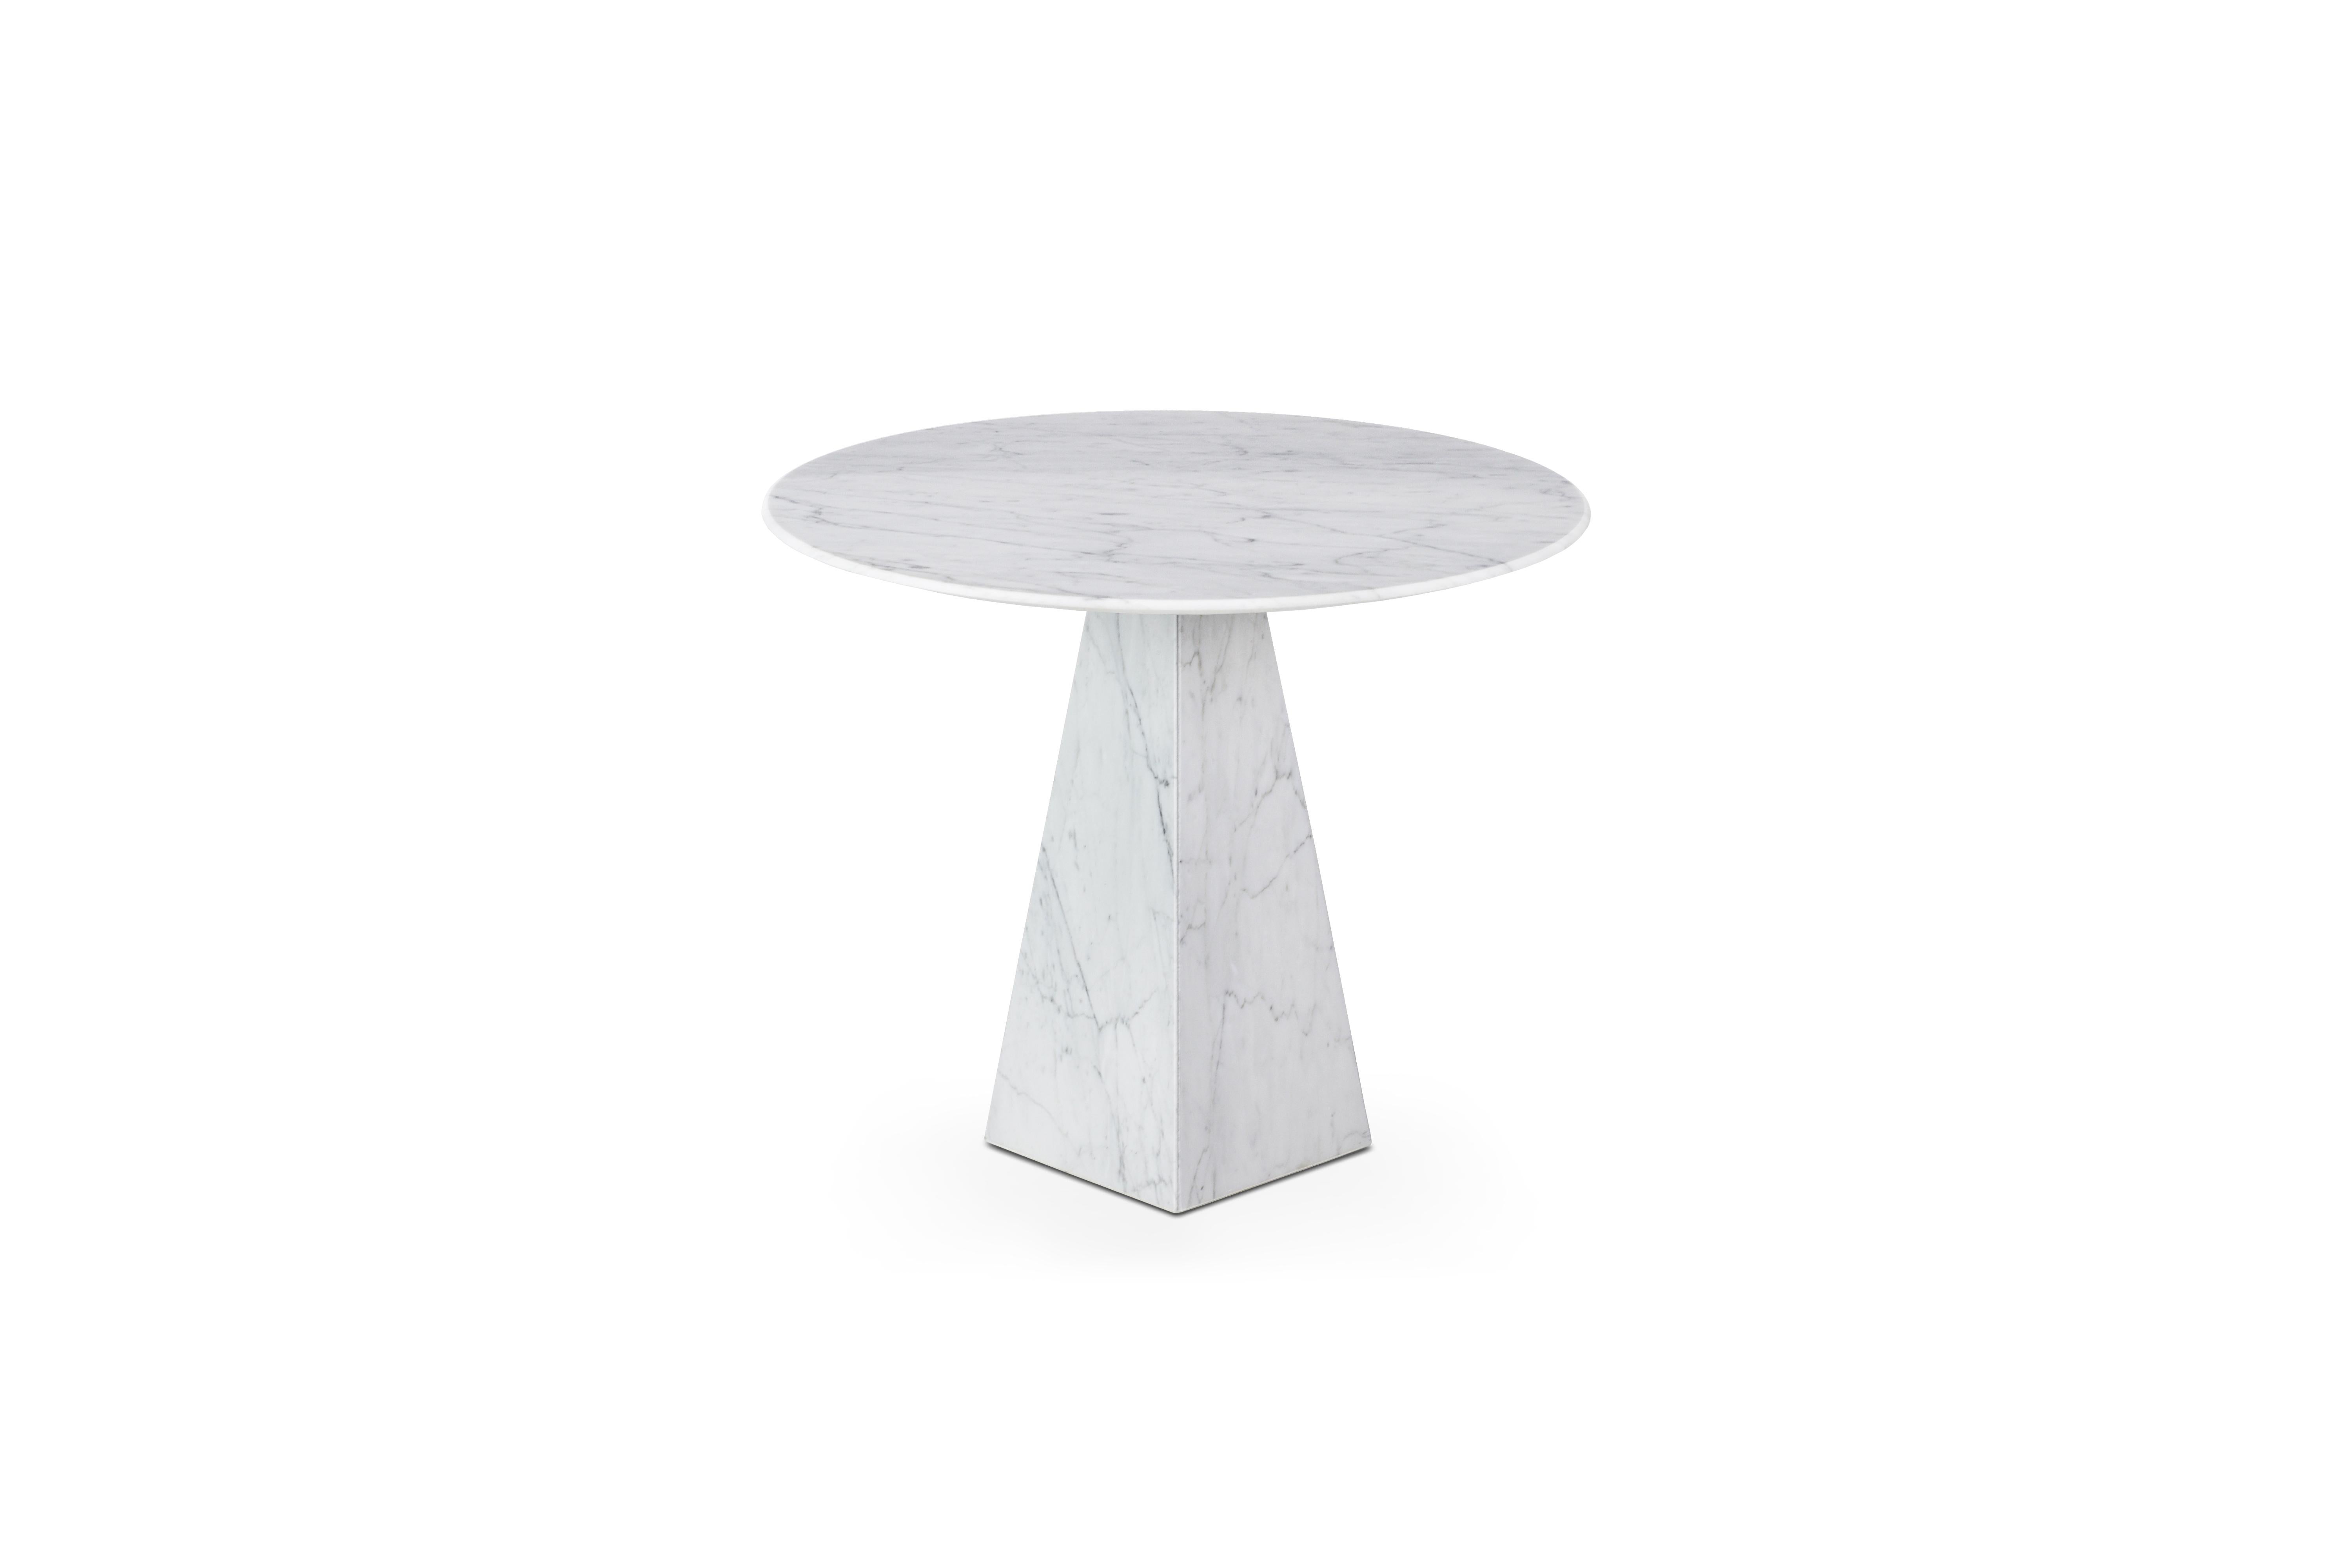 Portuguese Ultra Thin White Carrara Marble Round Sidetable For Sale